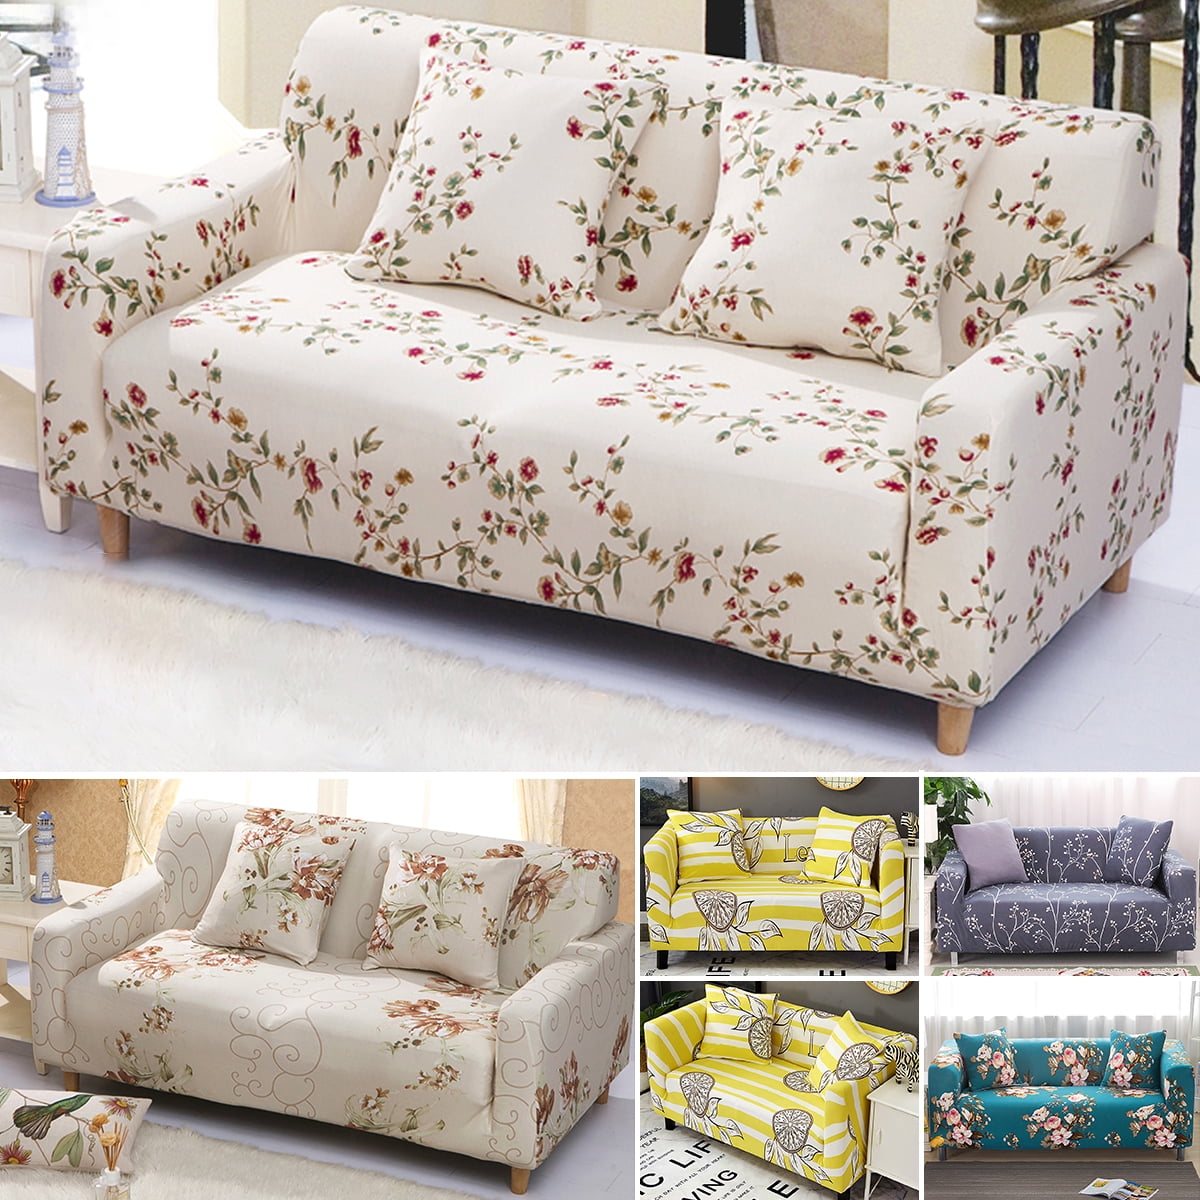 1-4 Seater Slipcover Village Style Sofa Covers Stretch Couch Cover Protector 